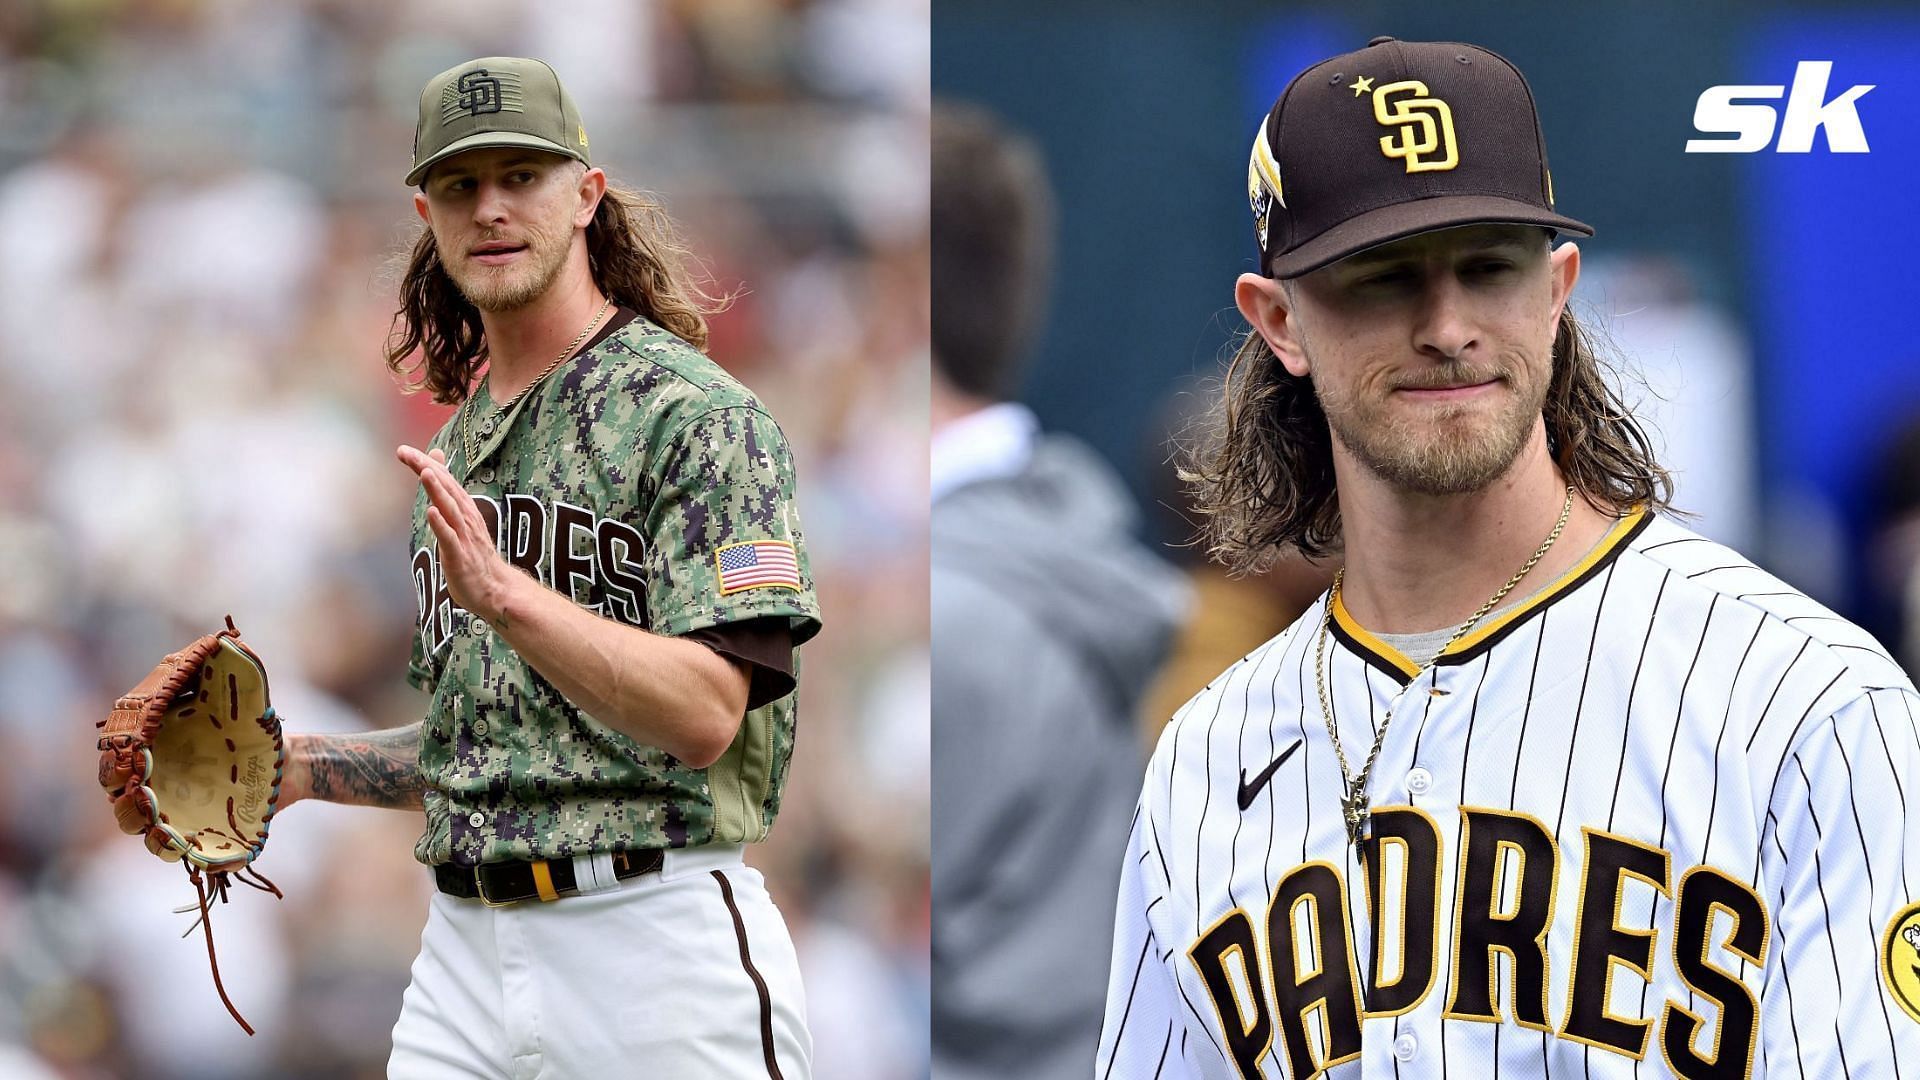 Josh Hader was at the forefront of social media backlash in 2018 after racist and homophobic posts emerged